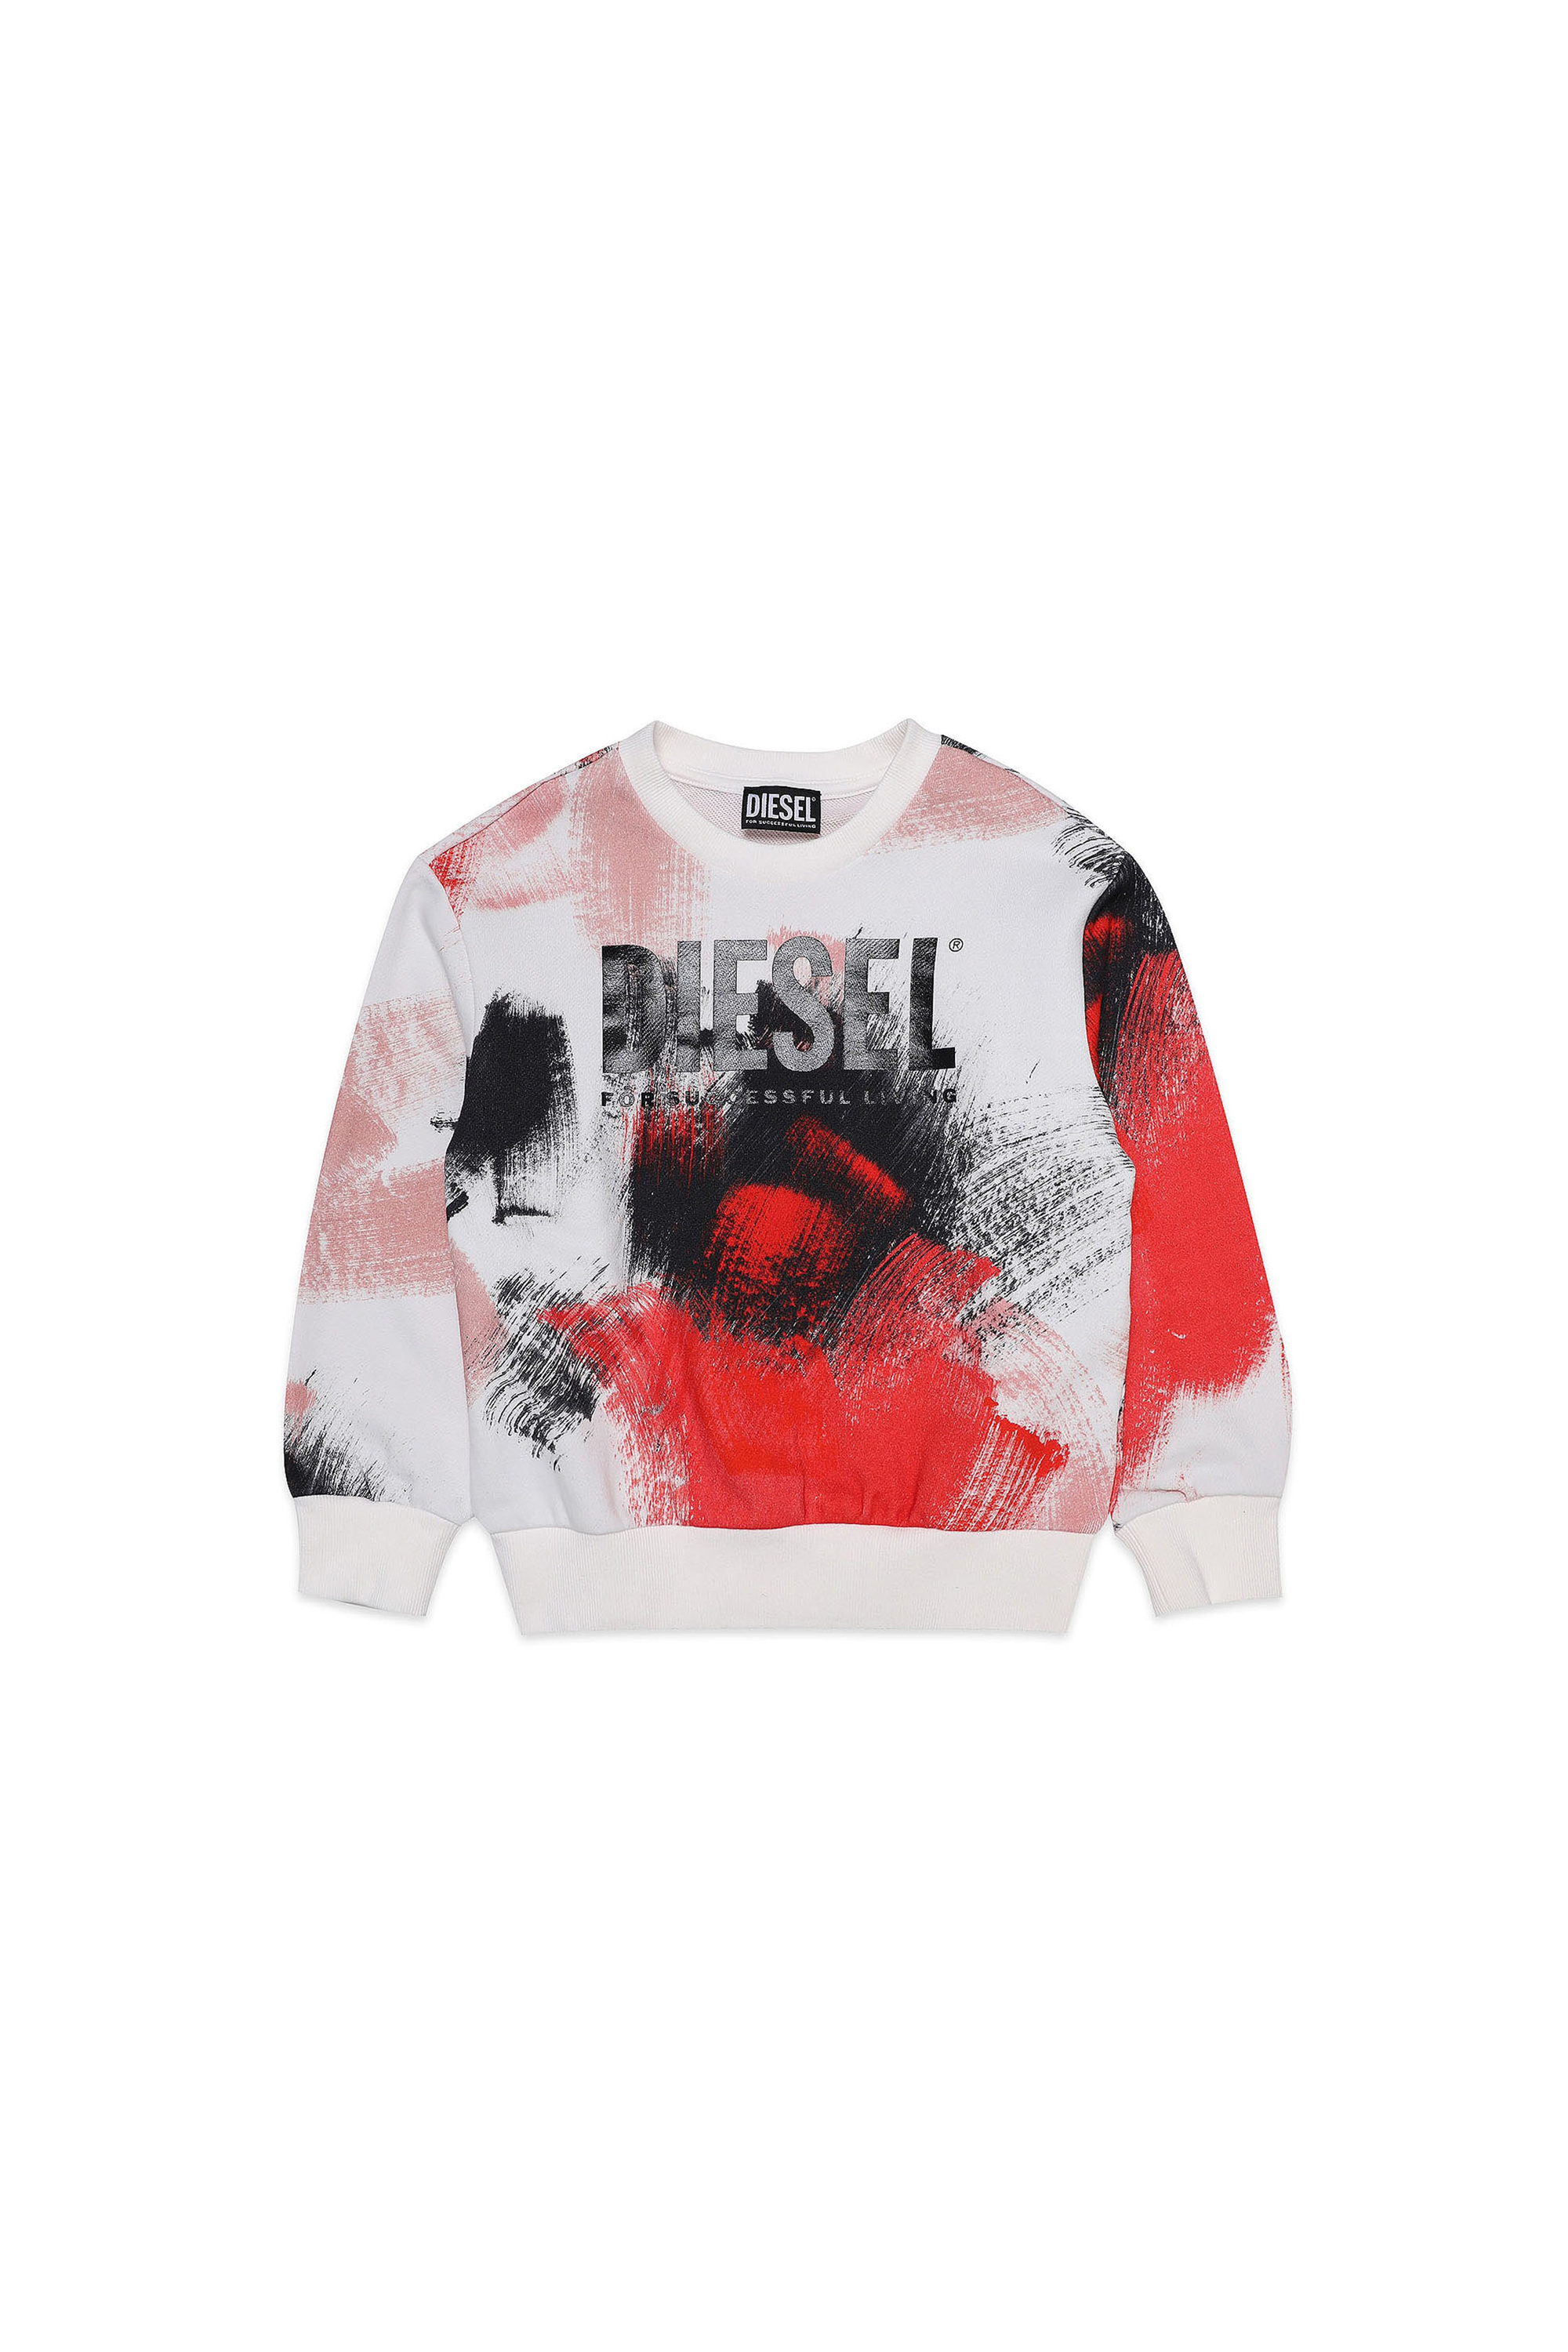 Diesel - SCREWRUSH OVER, White/Red - Image 1